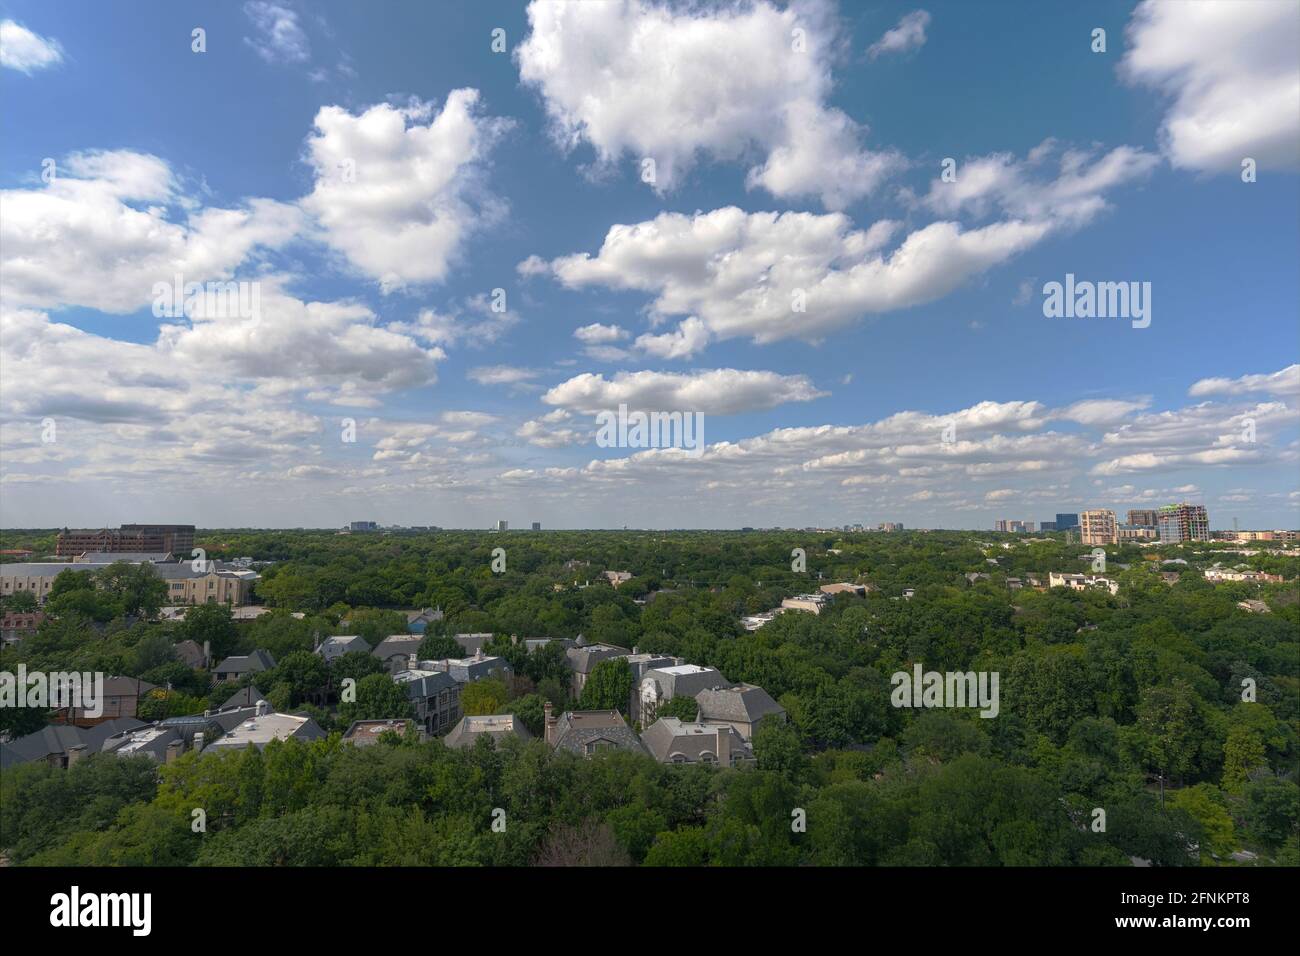 Overhead view of northwest, suburban Dallas, Texas from the balcony of a 17th floor condominium in Turtle Creek. Stock Photo